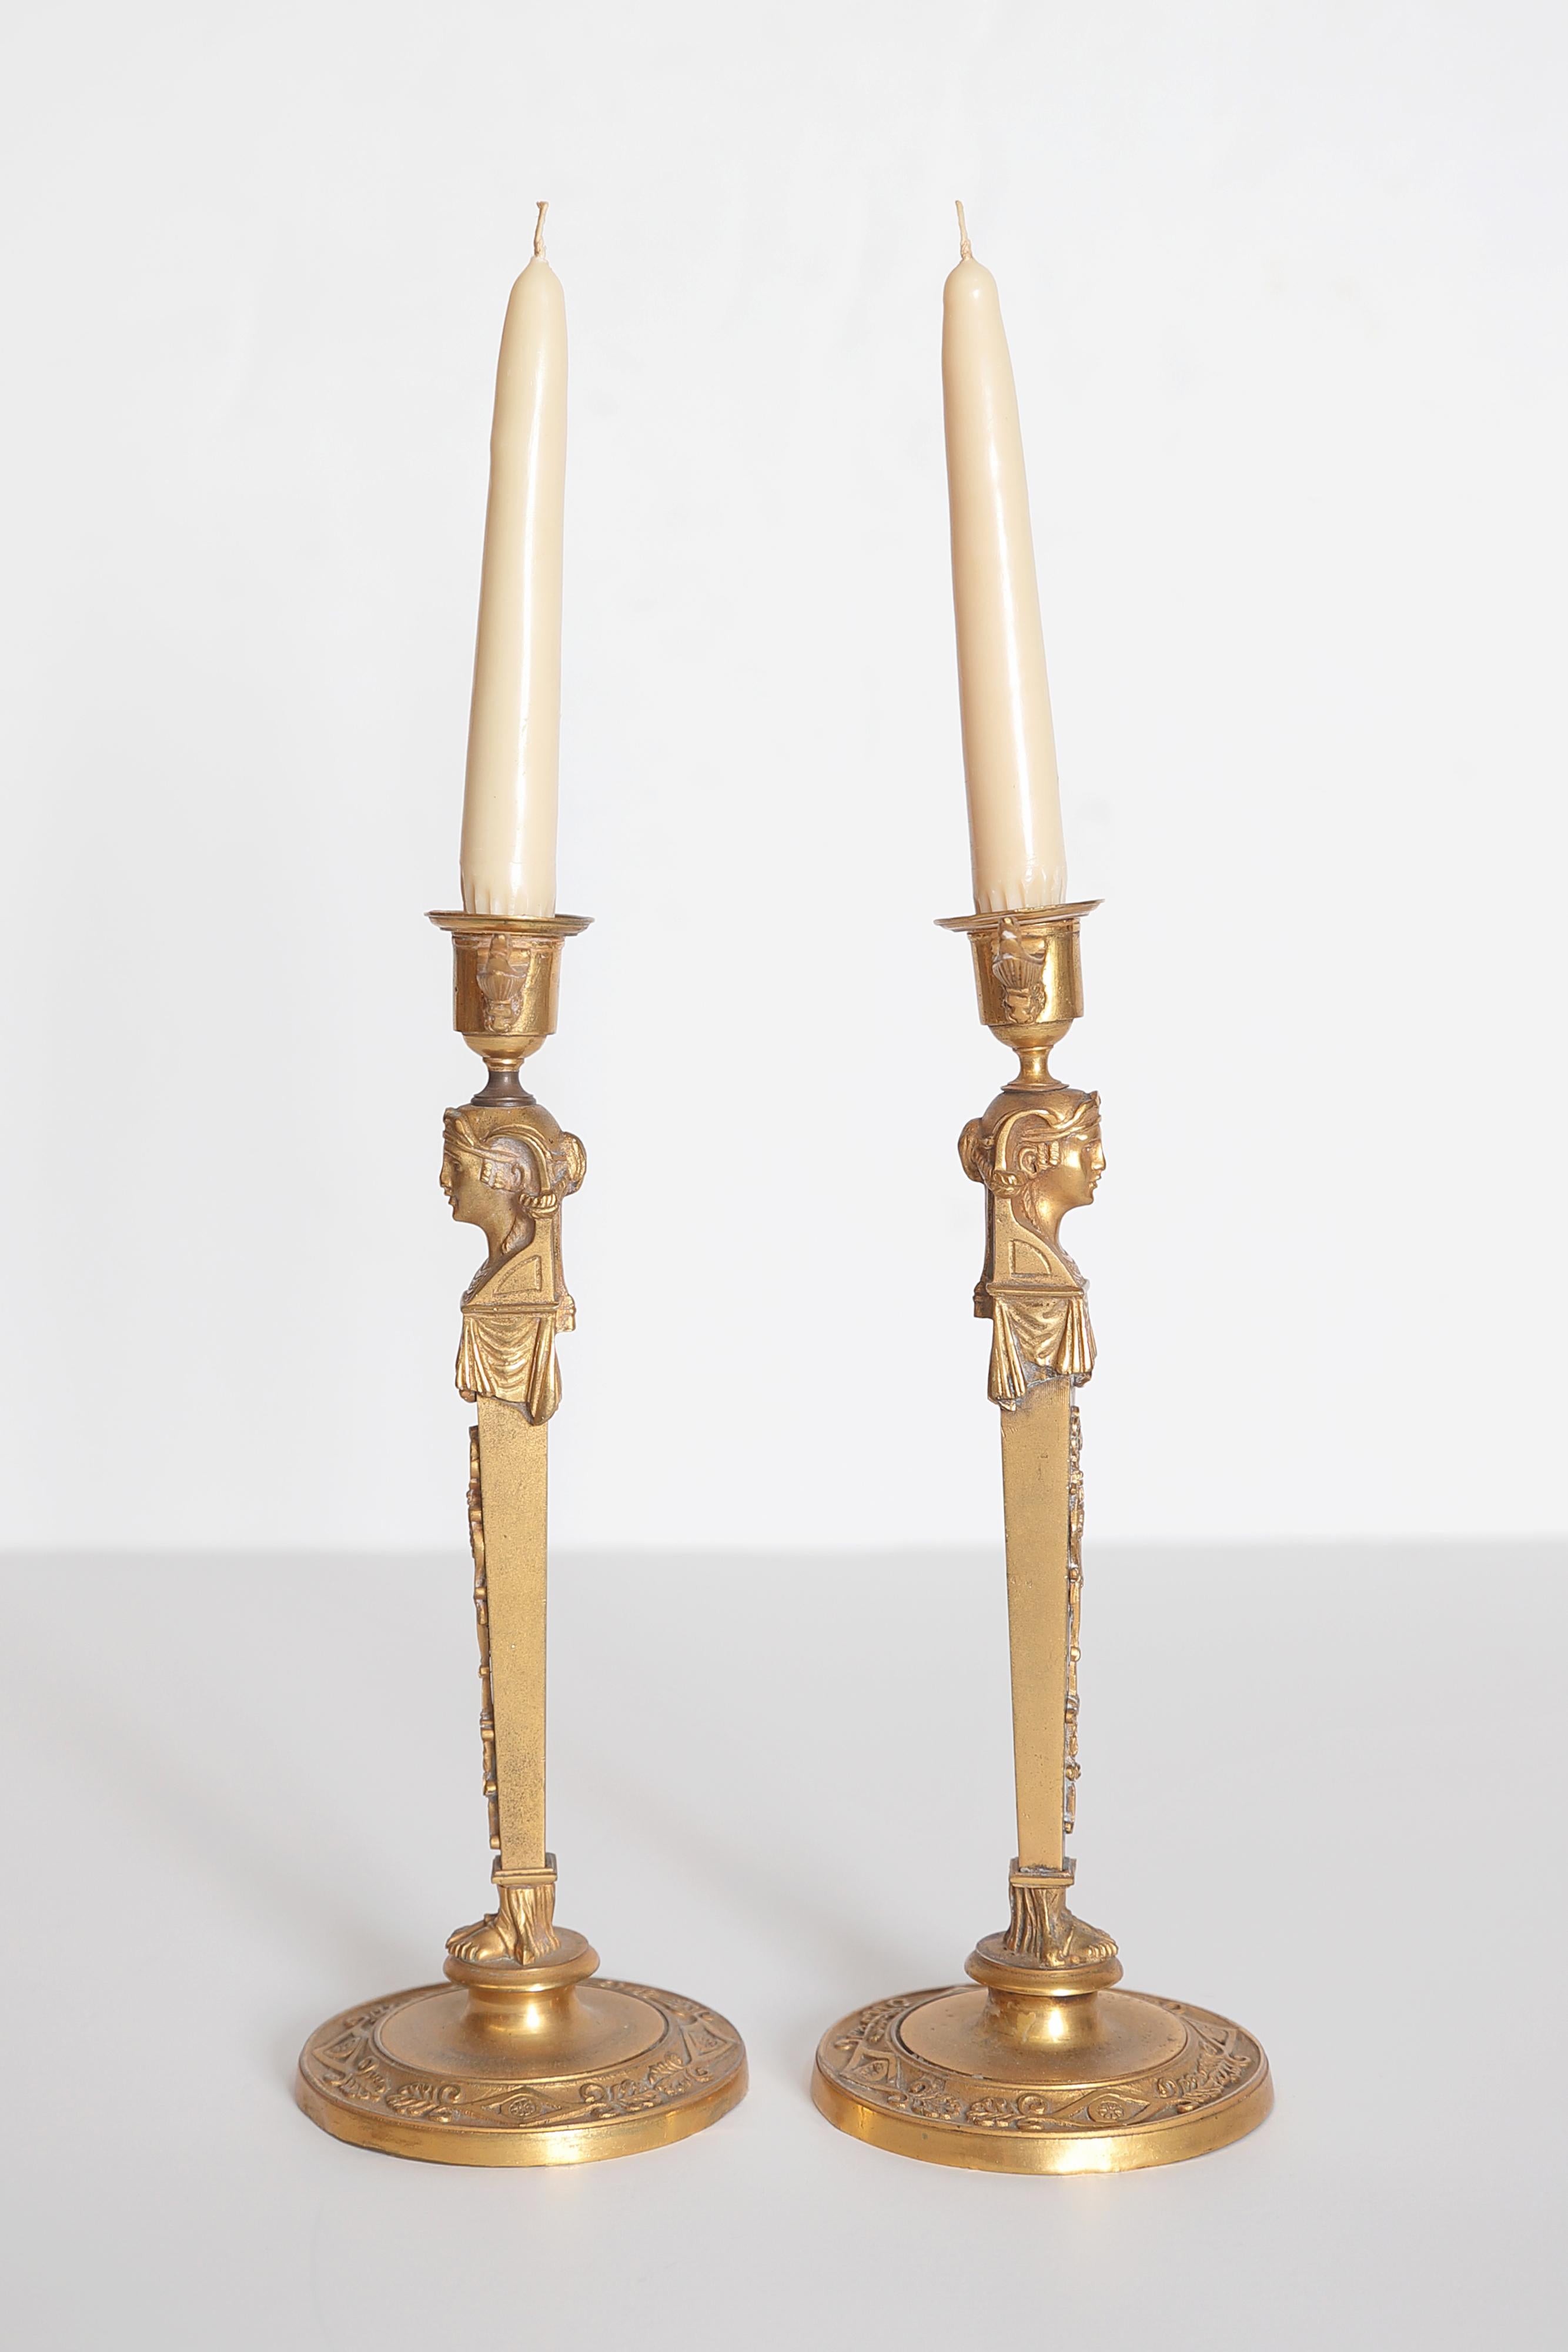 Pair of Regency Gilt Bronze Candlesticks in the Egyptian Taste In Good Condition For Sale In Dallas, TX